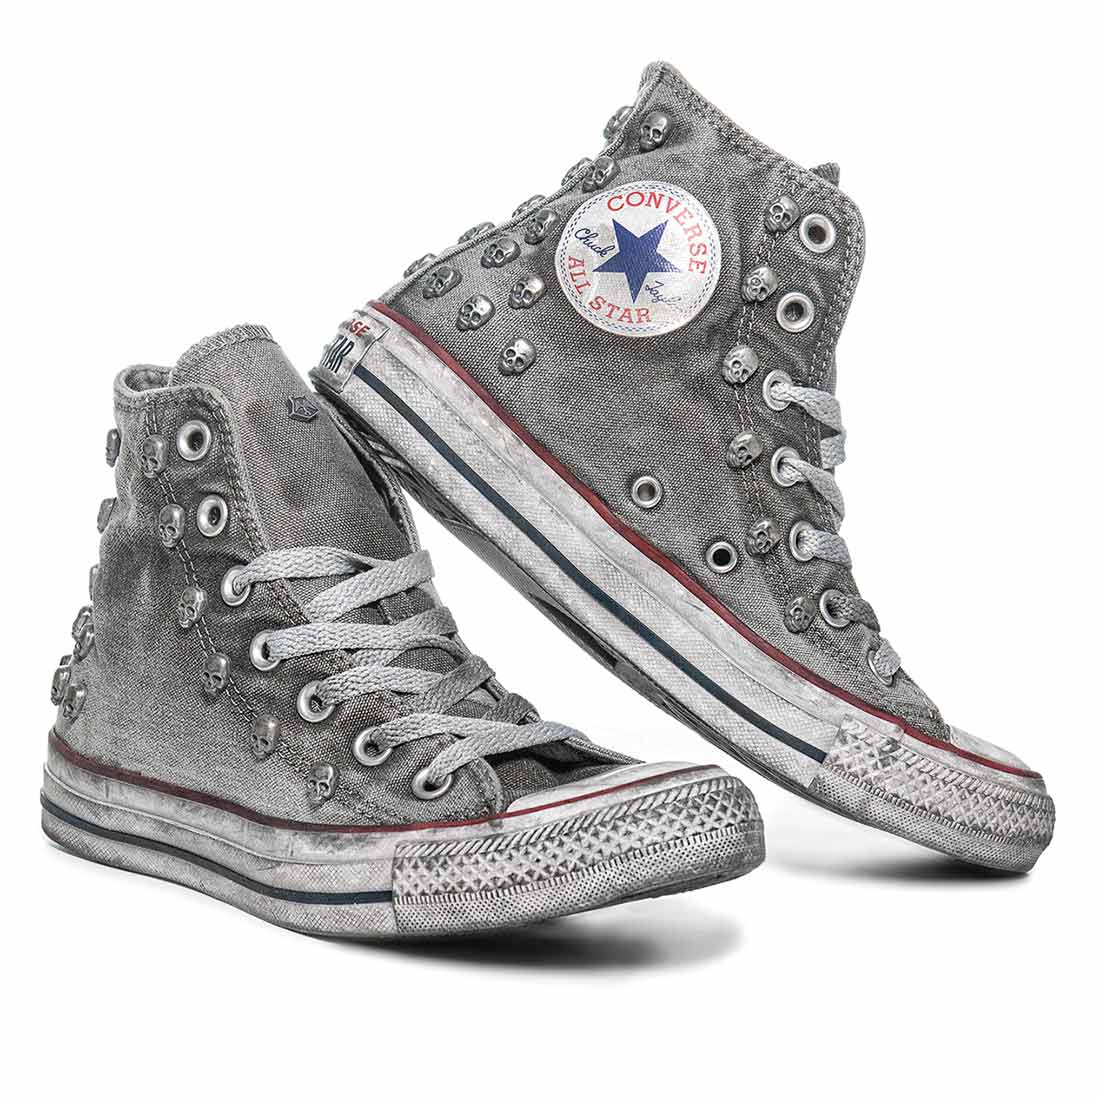 All Star Vintage limited edition con teschi